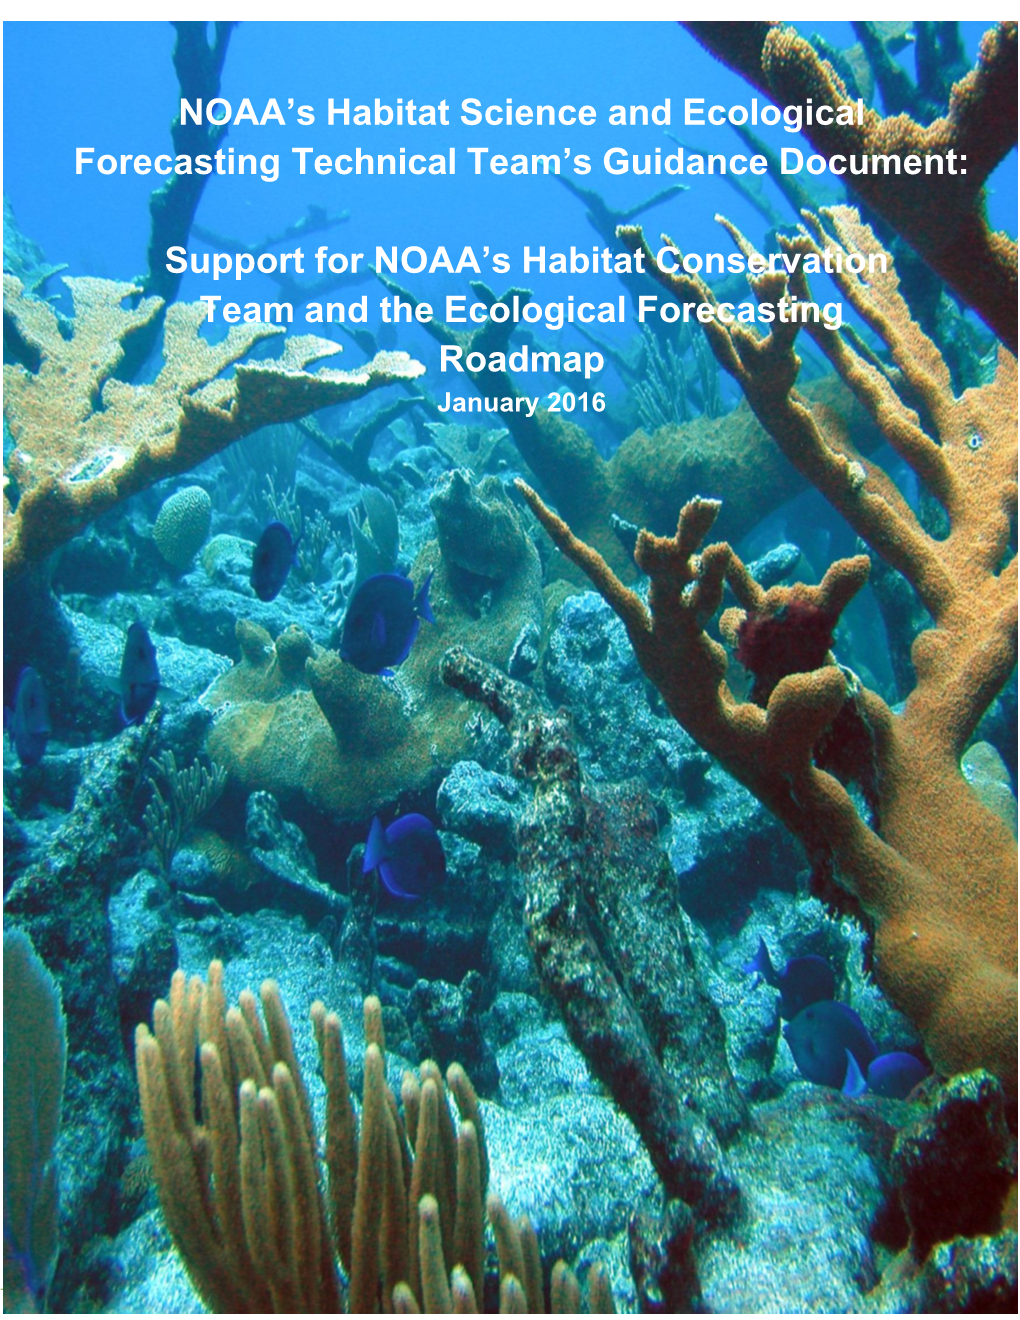 NOAA's Habitat Science and Ecological Forecasting Technical